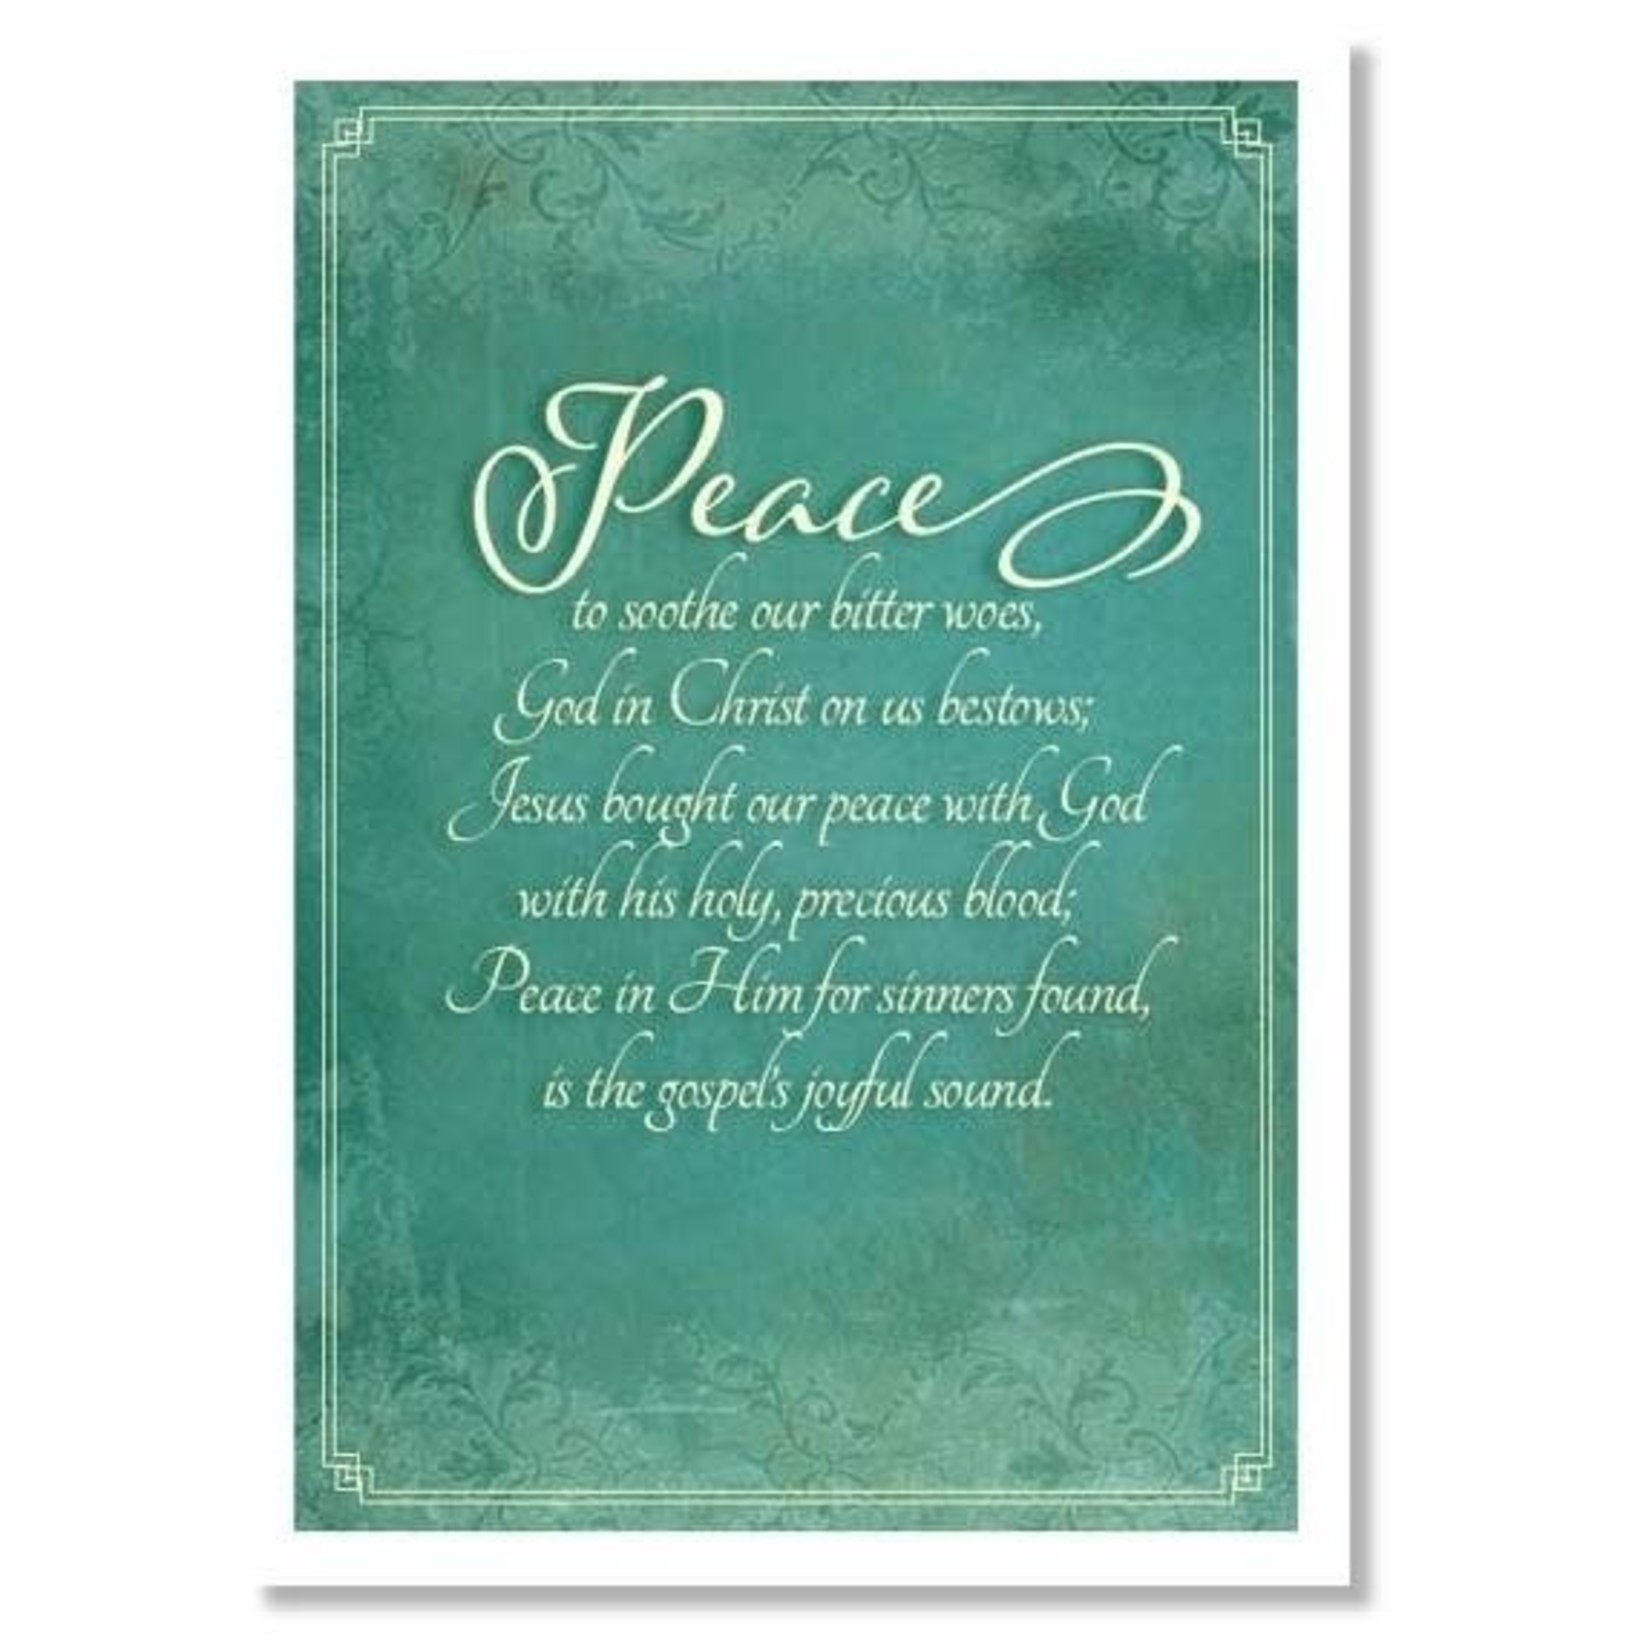 Hymns In My Heart - 5x7" Greeting Card - General - Peace To Soothe Our Bitter Woes